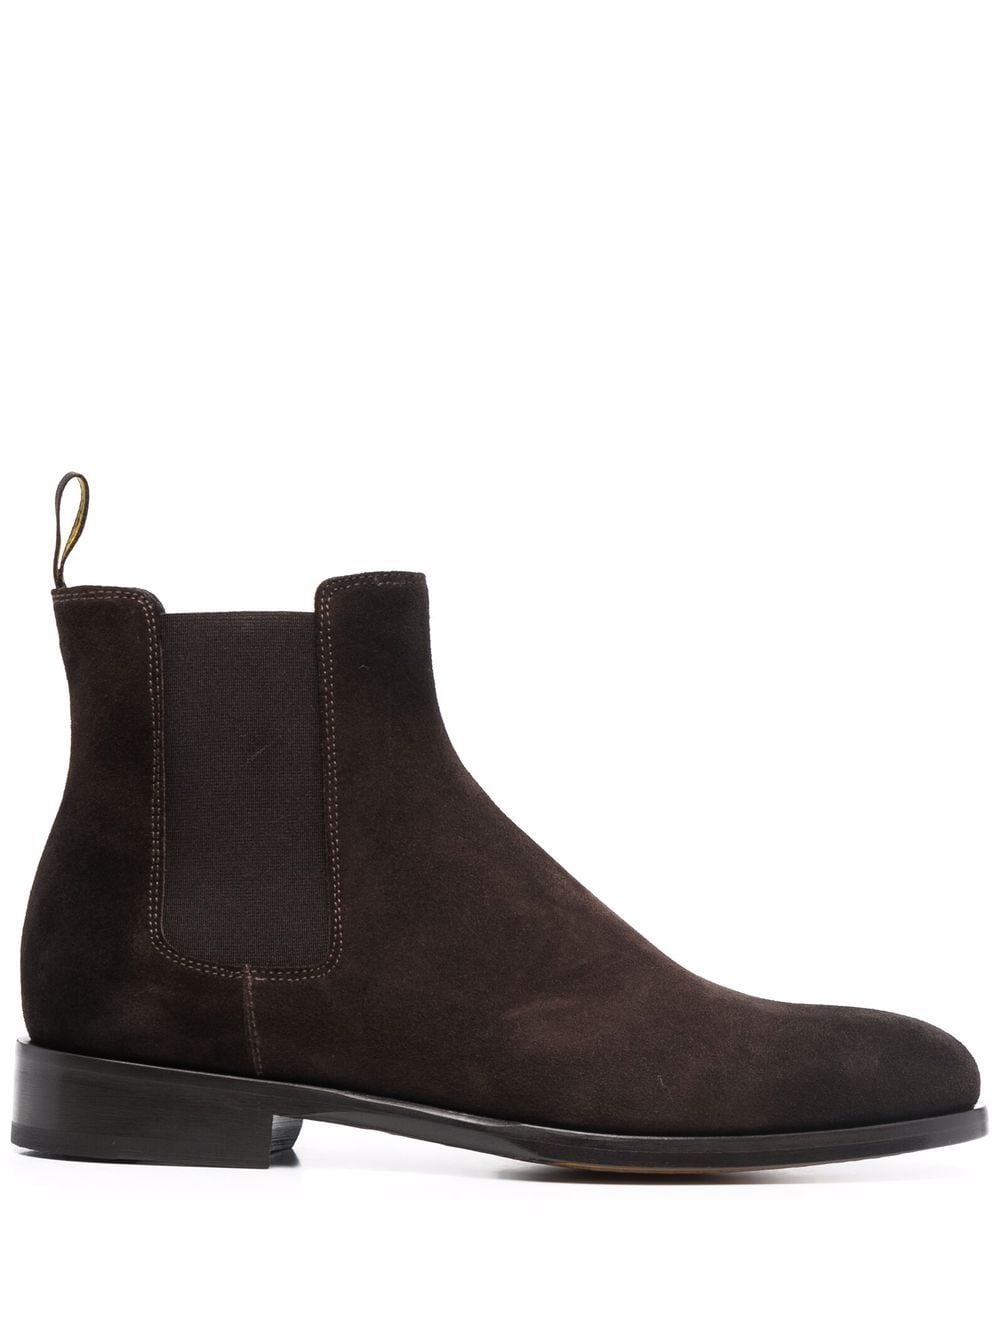 Doucal's suede chelsea boots - Brown von Doucal's